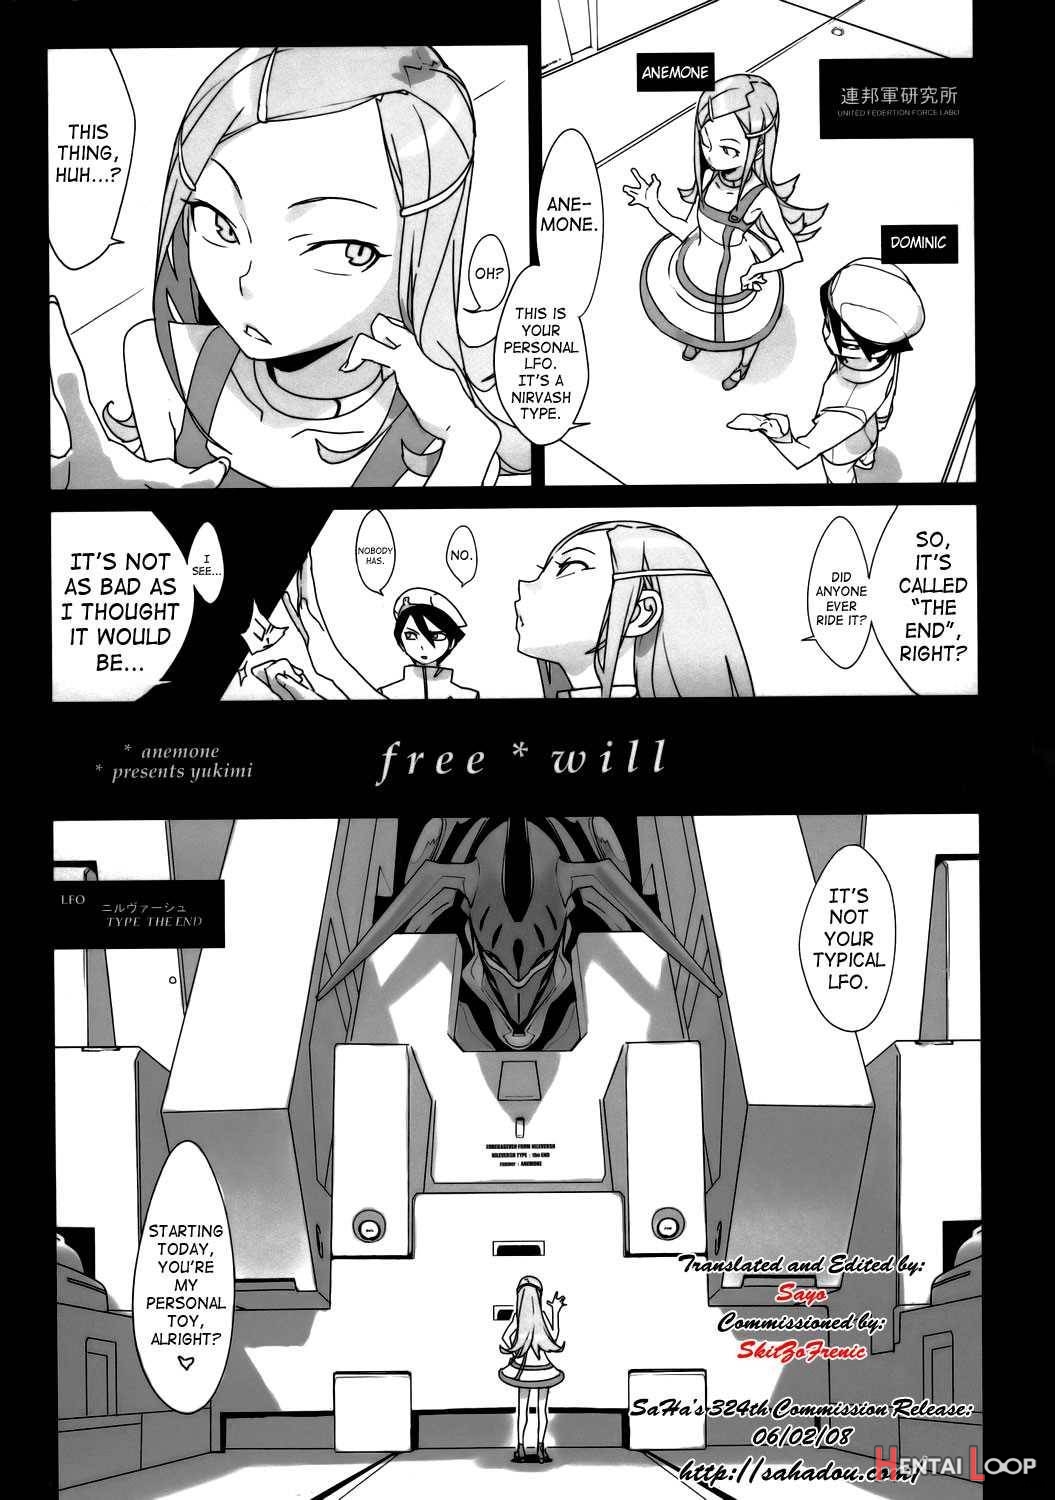 Free*will page 2